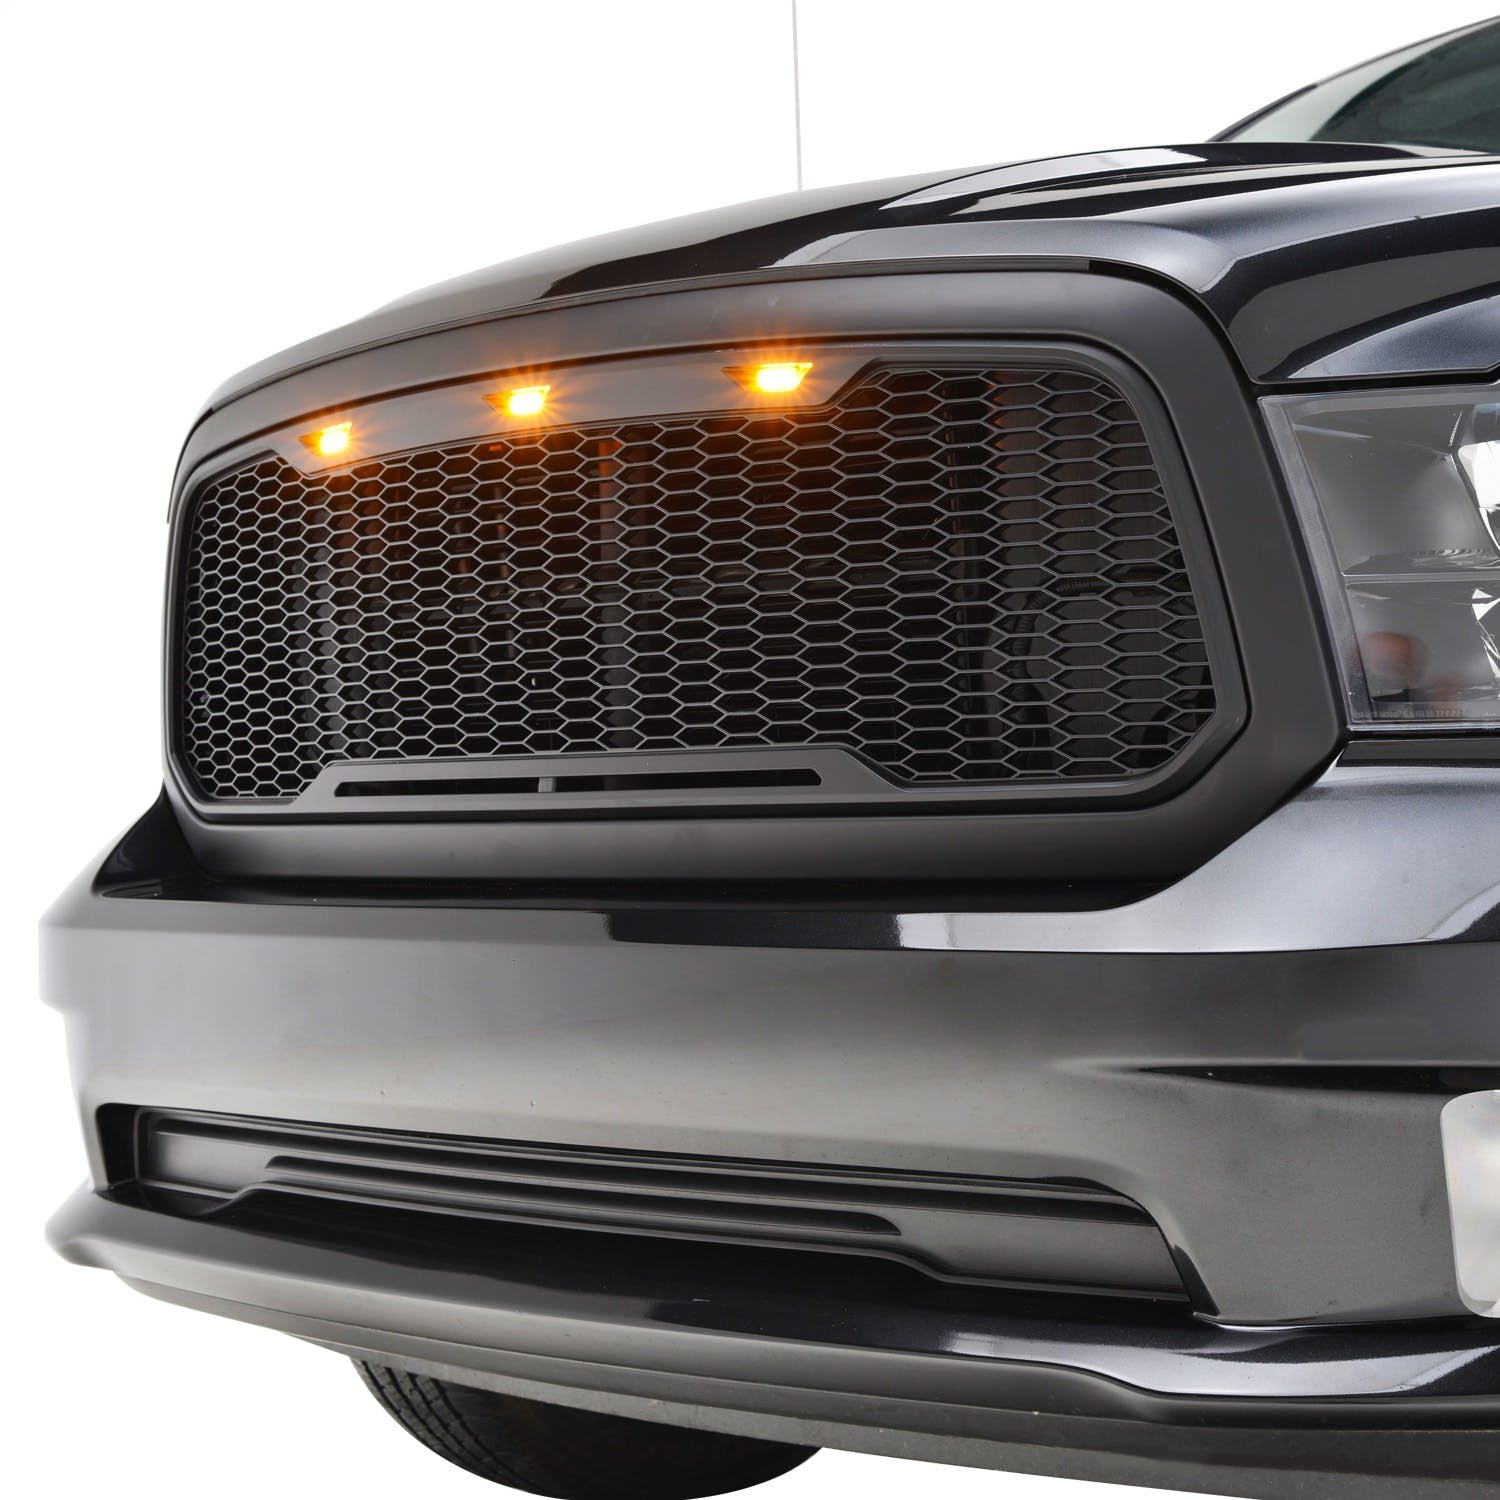 Paramount Automotive 41-0183MB Impulse Mesh Packaged Grille, Matte Black with Amber LEDs